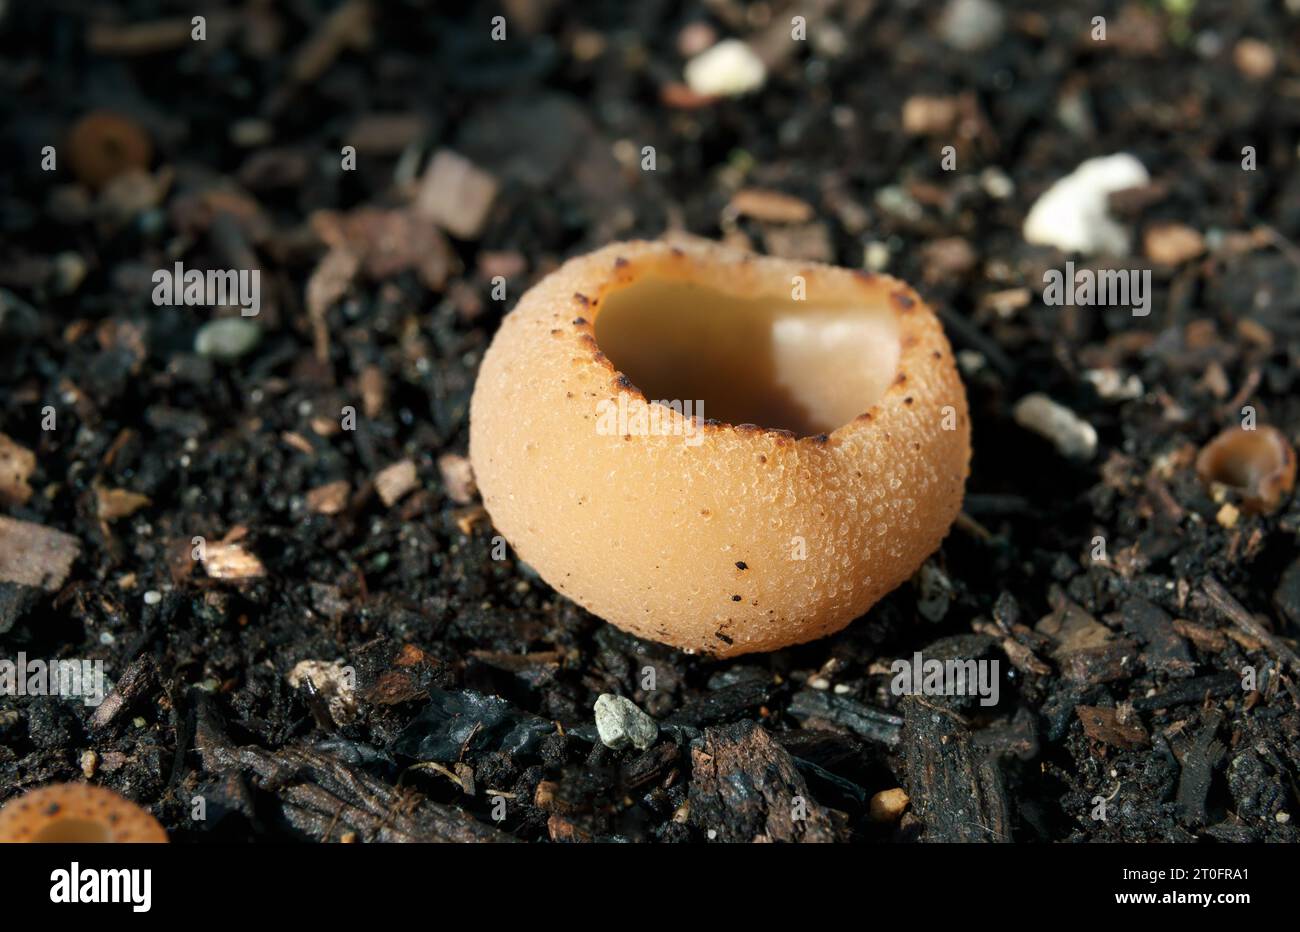 Inedible mushroom Tarzetta cupularis or Toothed cup fungi. Macro of cup like fungus found in spring or autumn. Grows in woodland areas or garden soil. Stock Photo